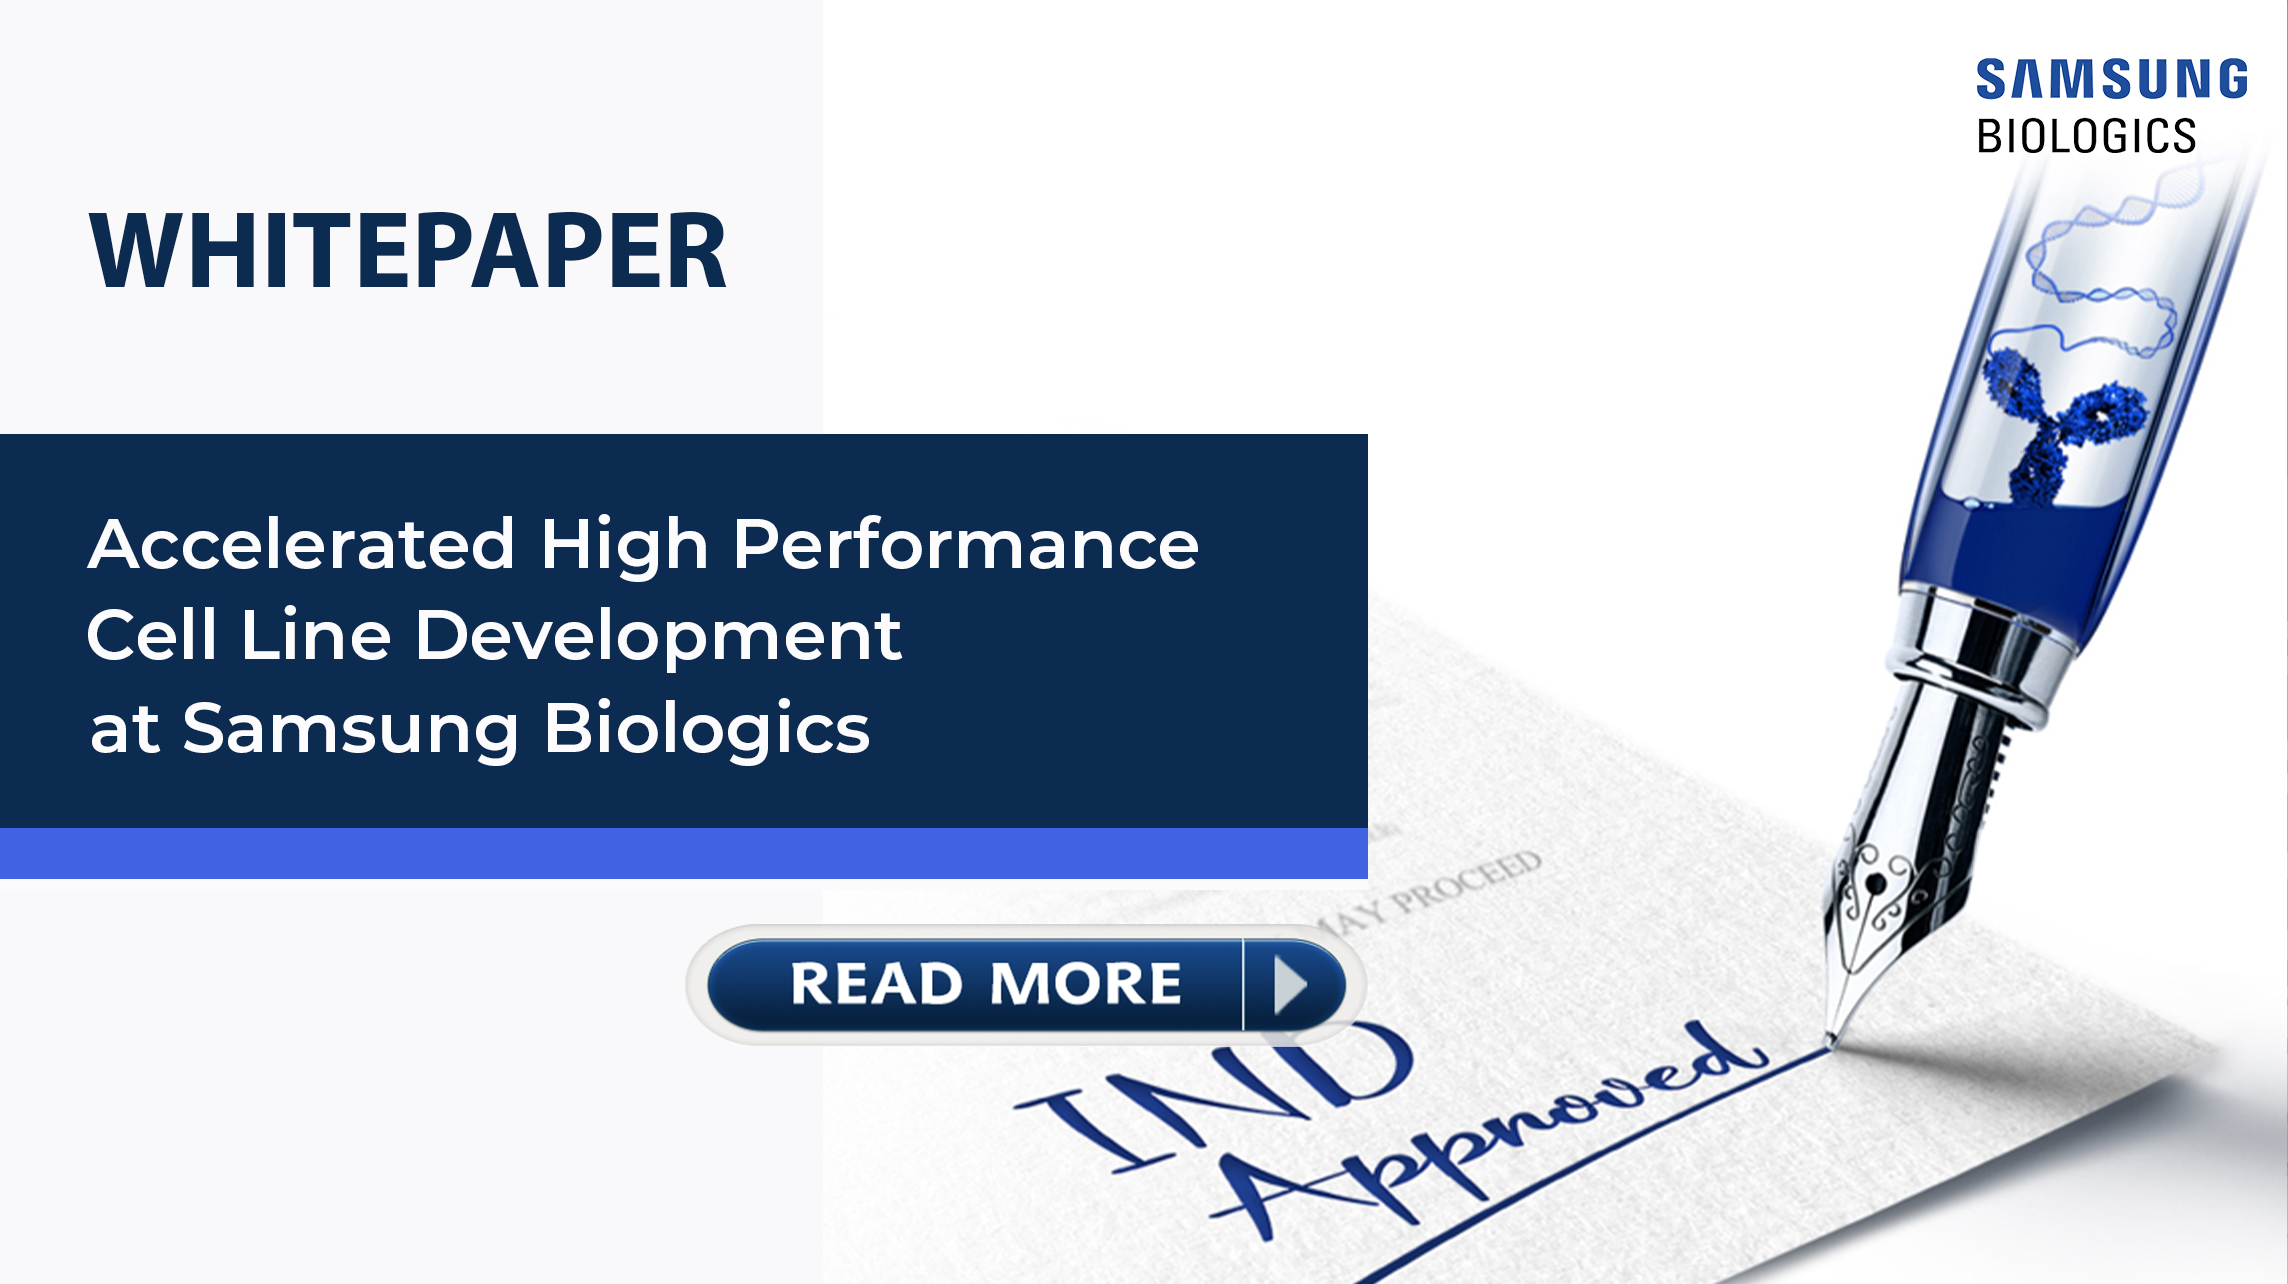 Accelerated High Performance Cell Line Development at Samsung Biologics